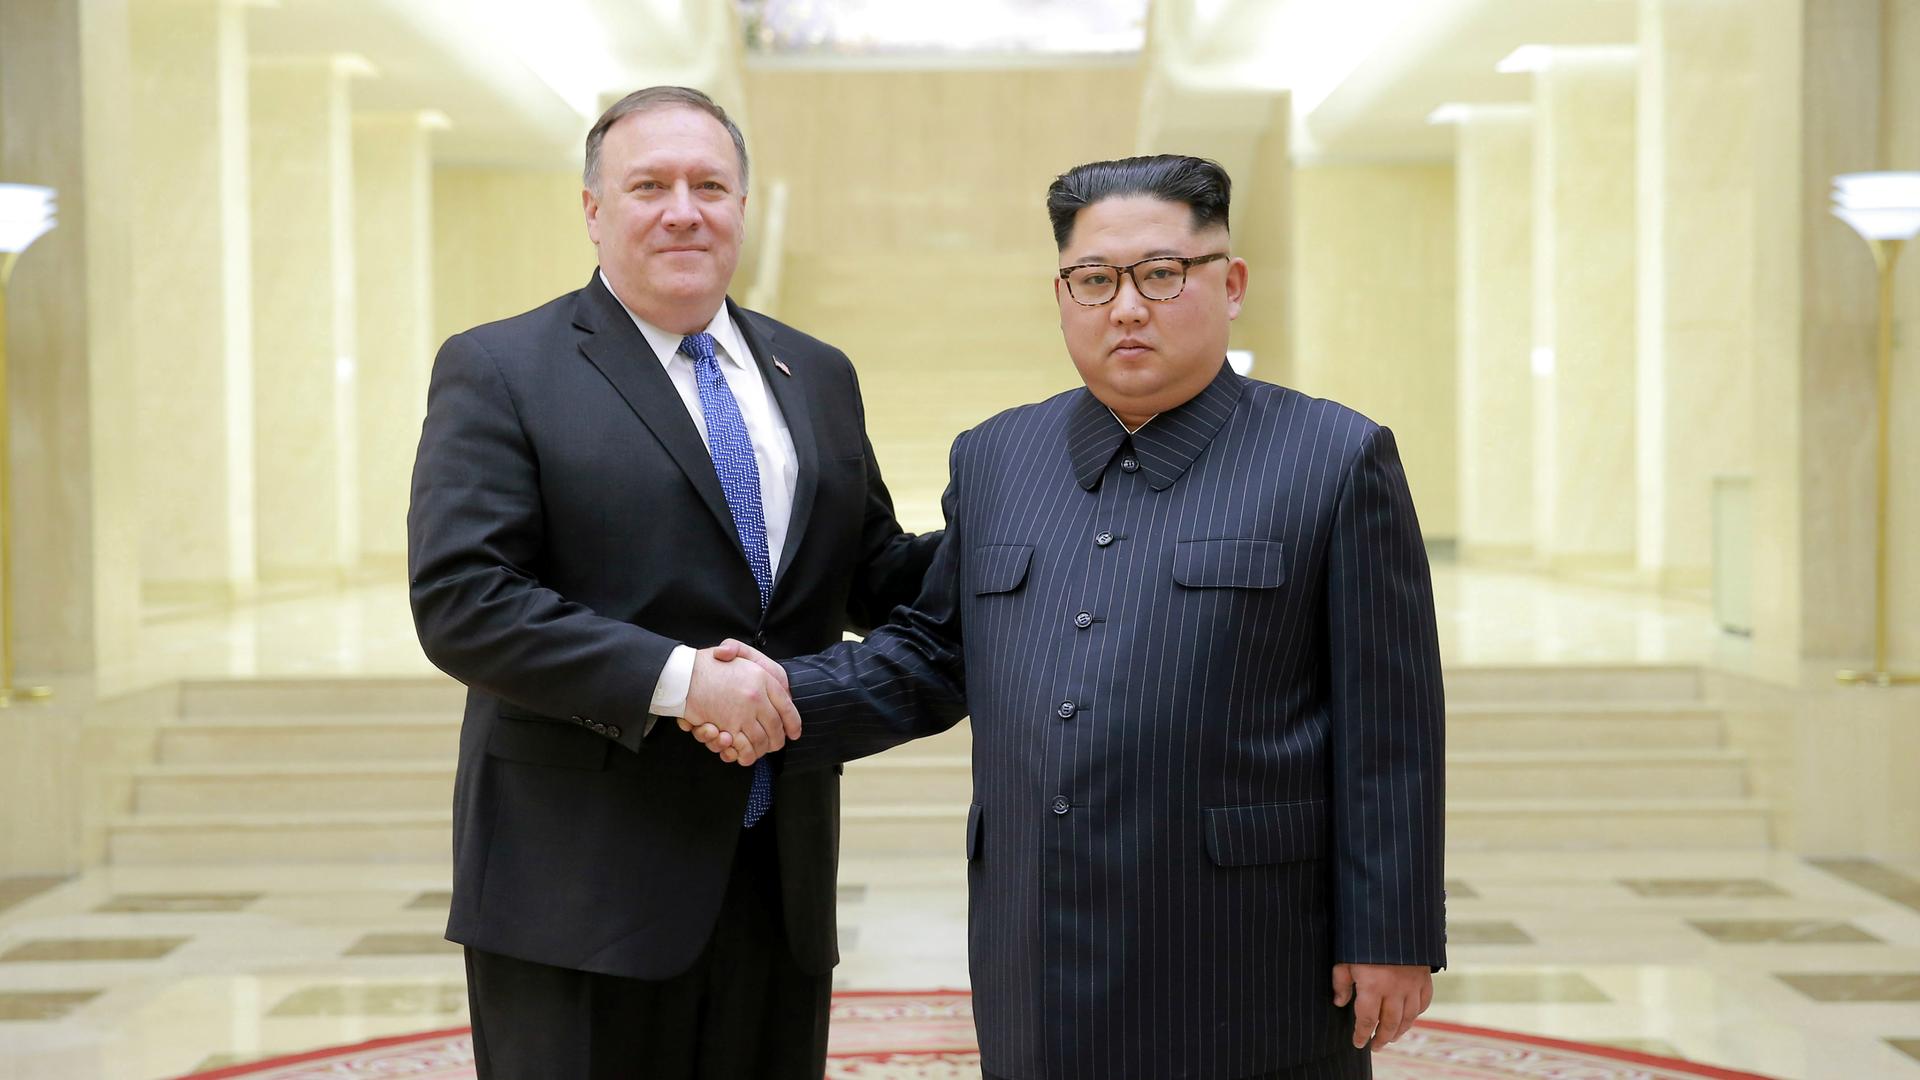 North Korean leader Kim Jong Un shakes hands with US Secretary of State Mike Pompeo in this undated photo released on May 9, 2018, by North Korea's Korean Central News Agency in Pyongyang. The same day, North Korea released three American prisoners, pavin